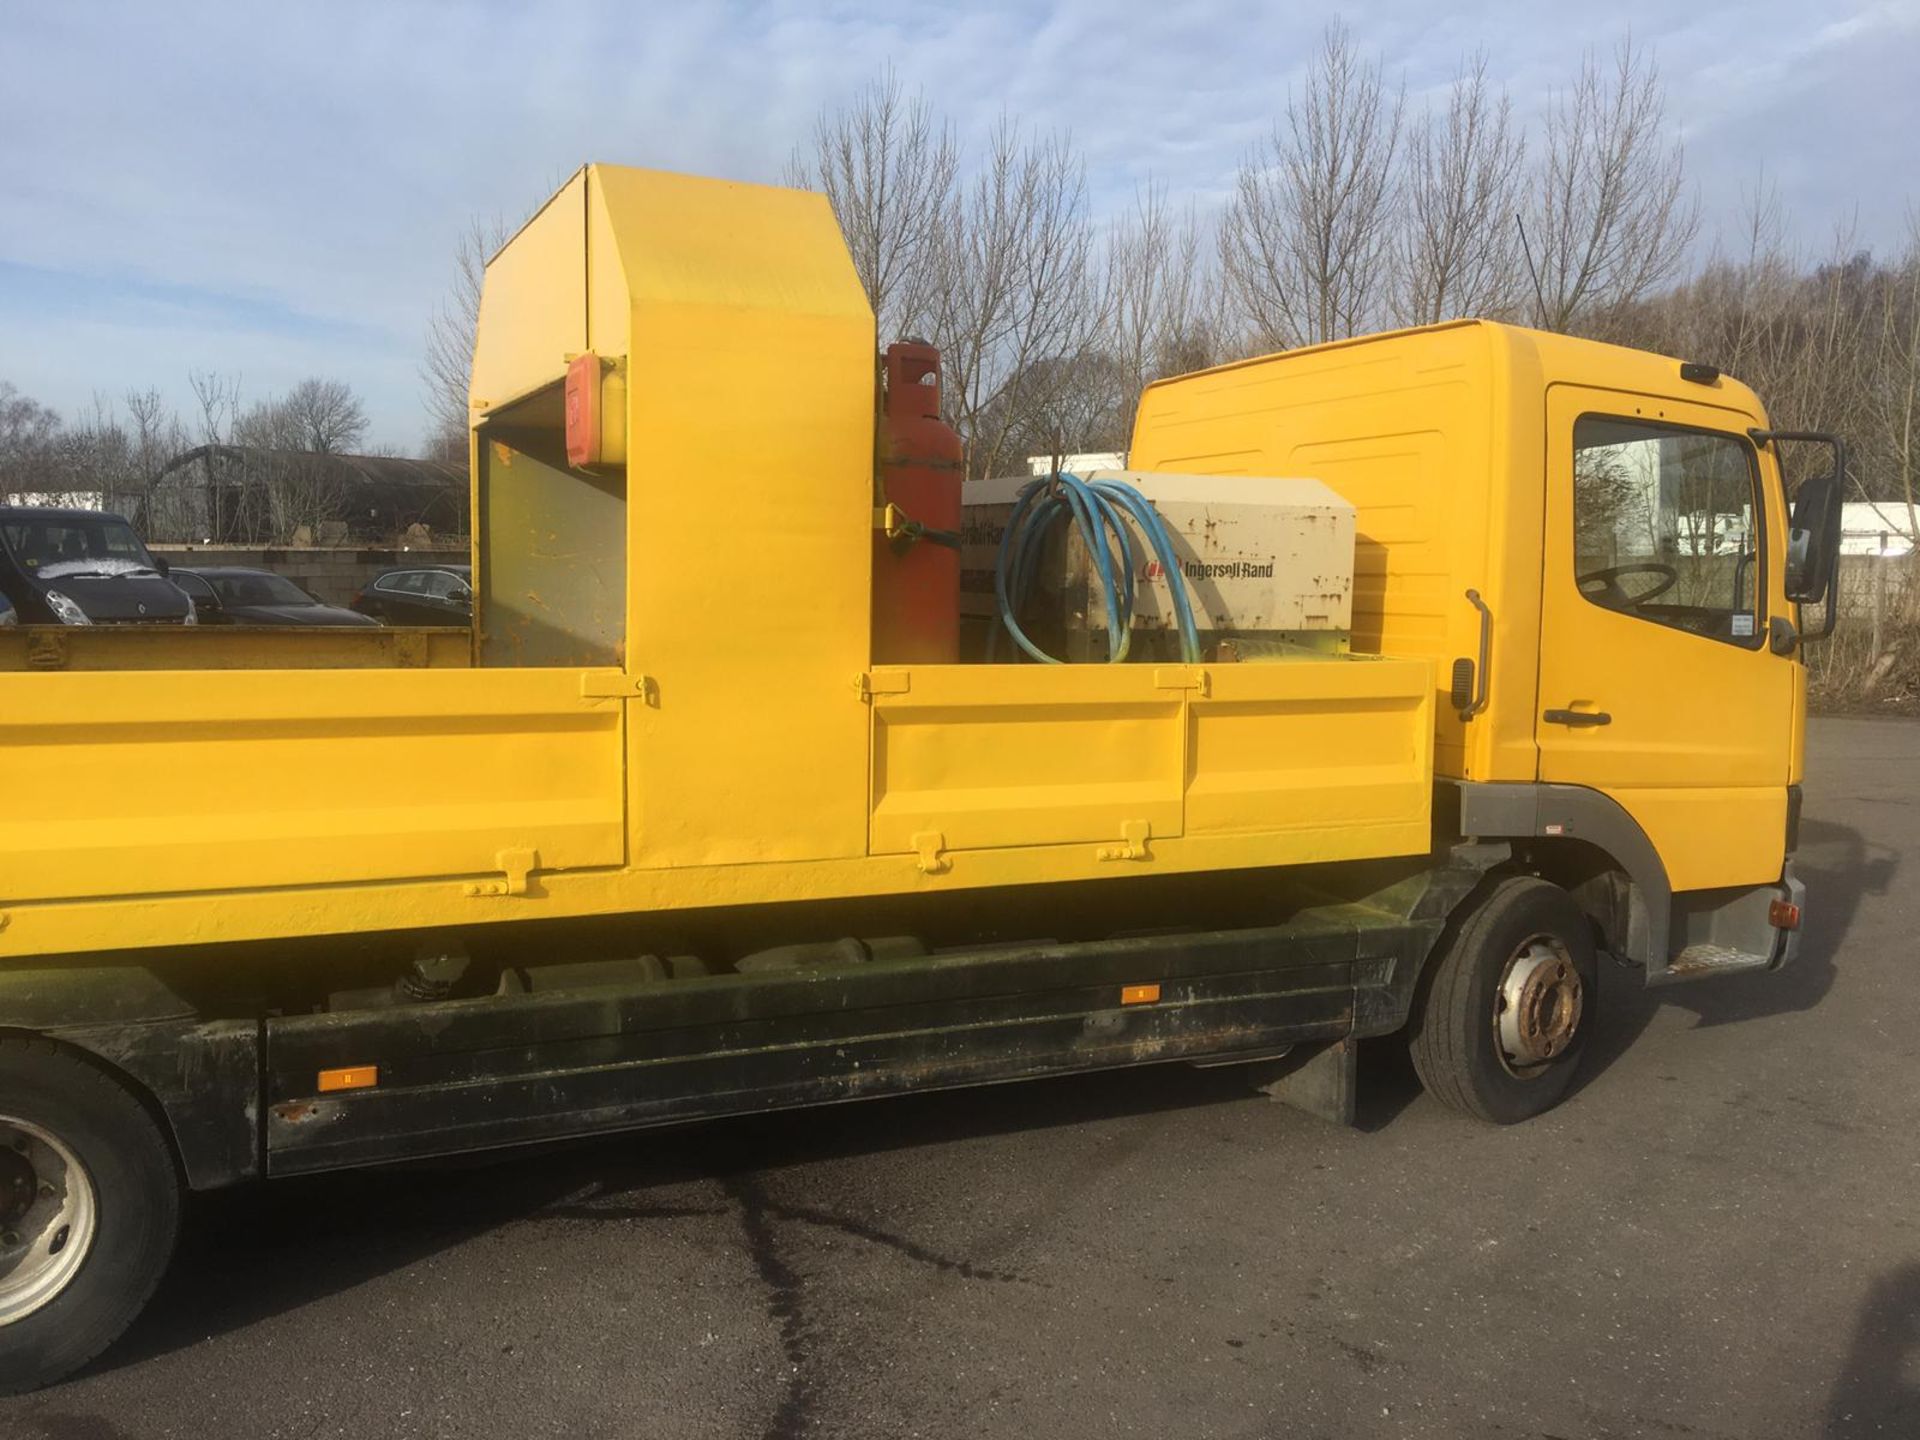 2004/54 REG MERCEDES ATEGO 1018 DAY YELLOW DROPSIDE LINE PAINTING LORRY 4.3L DIESEL ENGINE *NO VAT* - Image 10 of 64